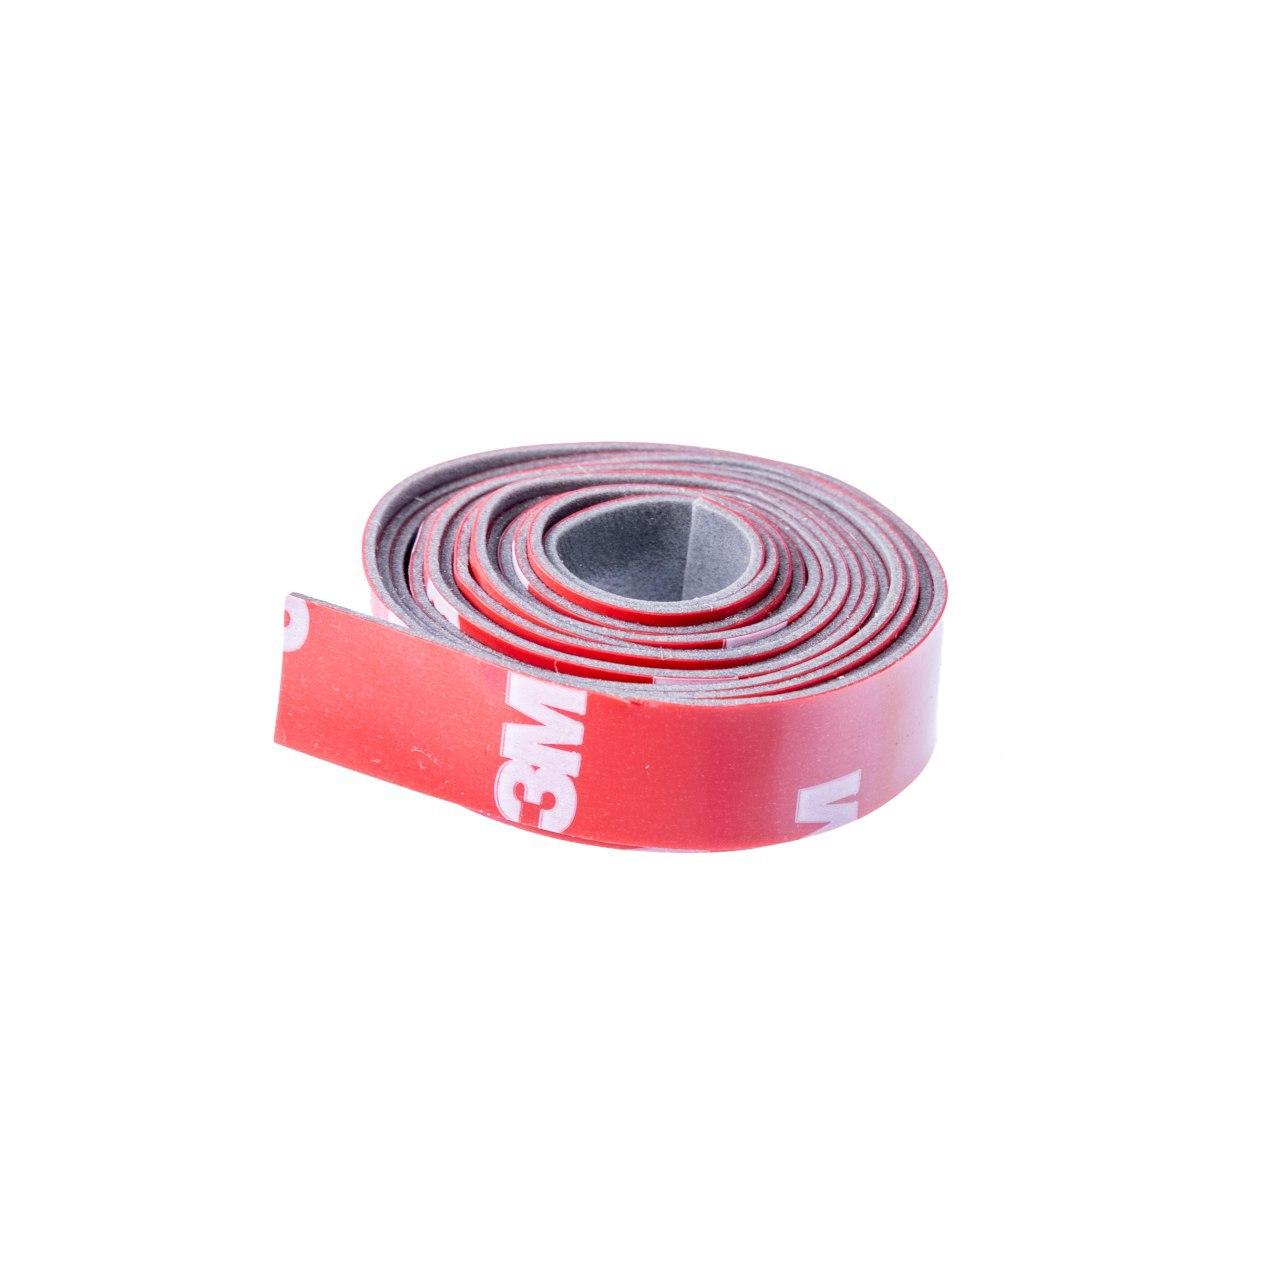 3-M Tape Strong Hold Heavy Duty